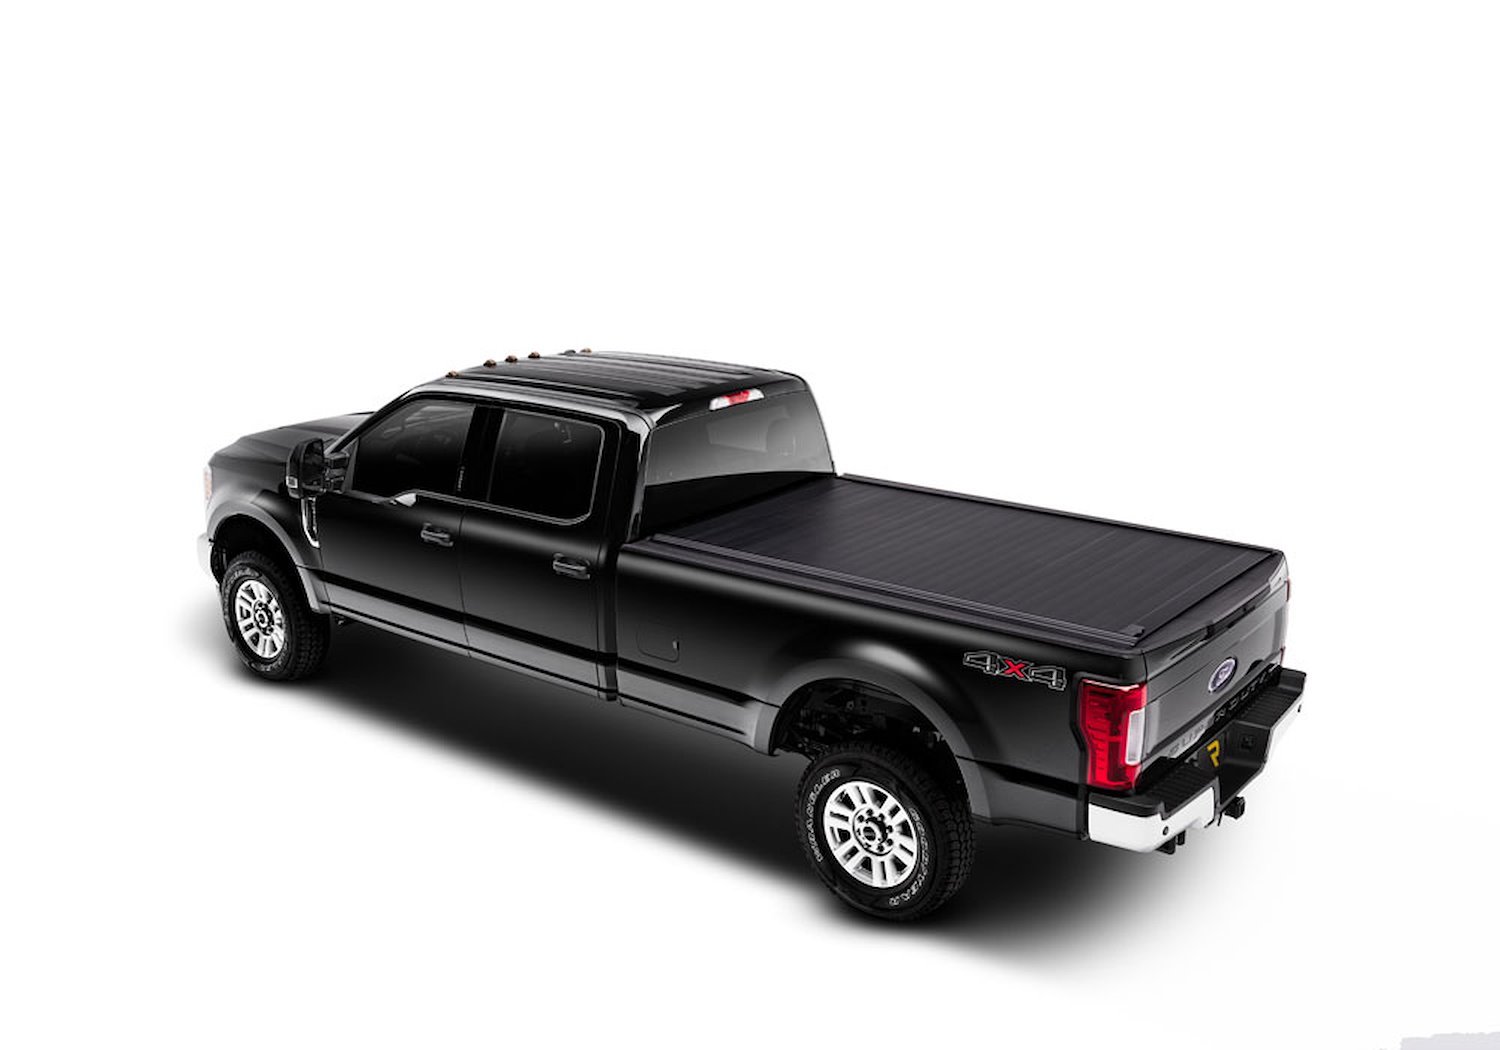 80384 RetraxPRO MX Retractable Tonneau Cover Fits Select Ford F-250/350/450 8' 2" Bed without Stake Pockets